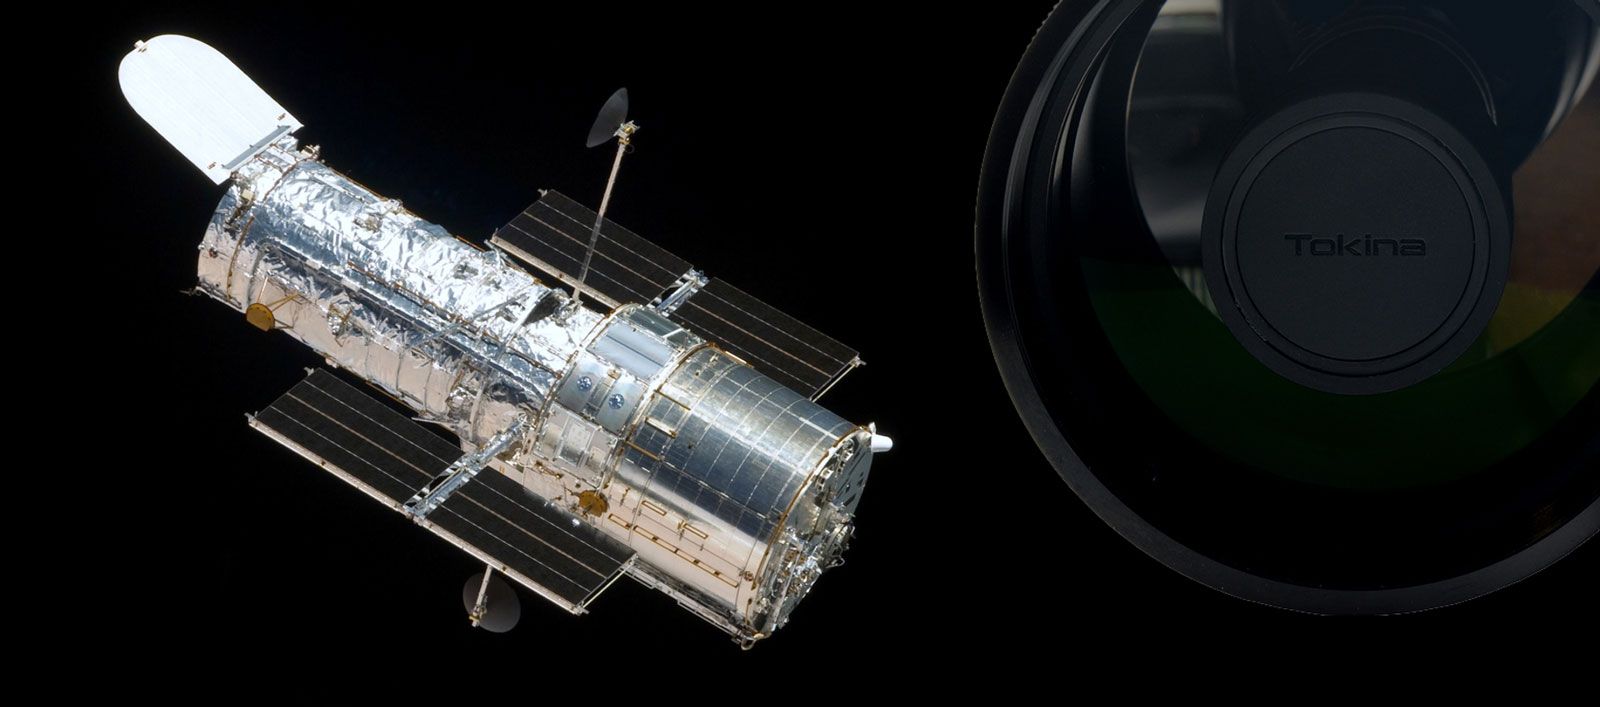 Photo of NASA's Hubble Space Telescope taken during the fifth servicing mission in 2009
Image: Ruffnax (Crew of STS-125) | https://commons.wikimedia.org/wiki/File:HST-SM4.jpeg